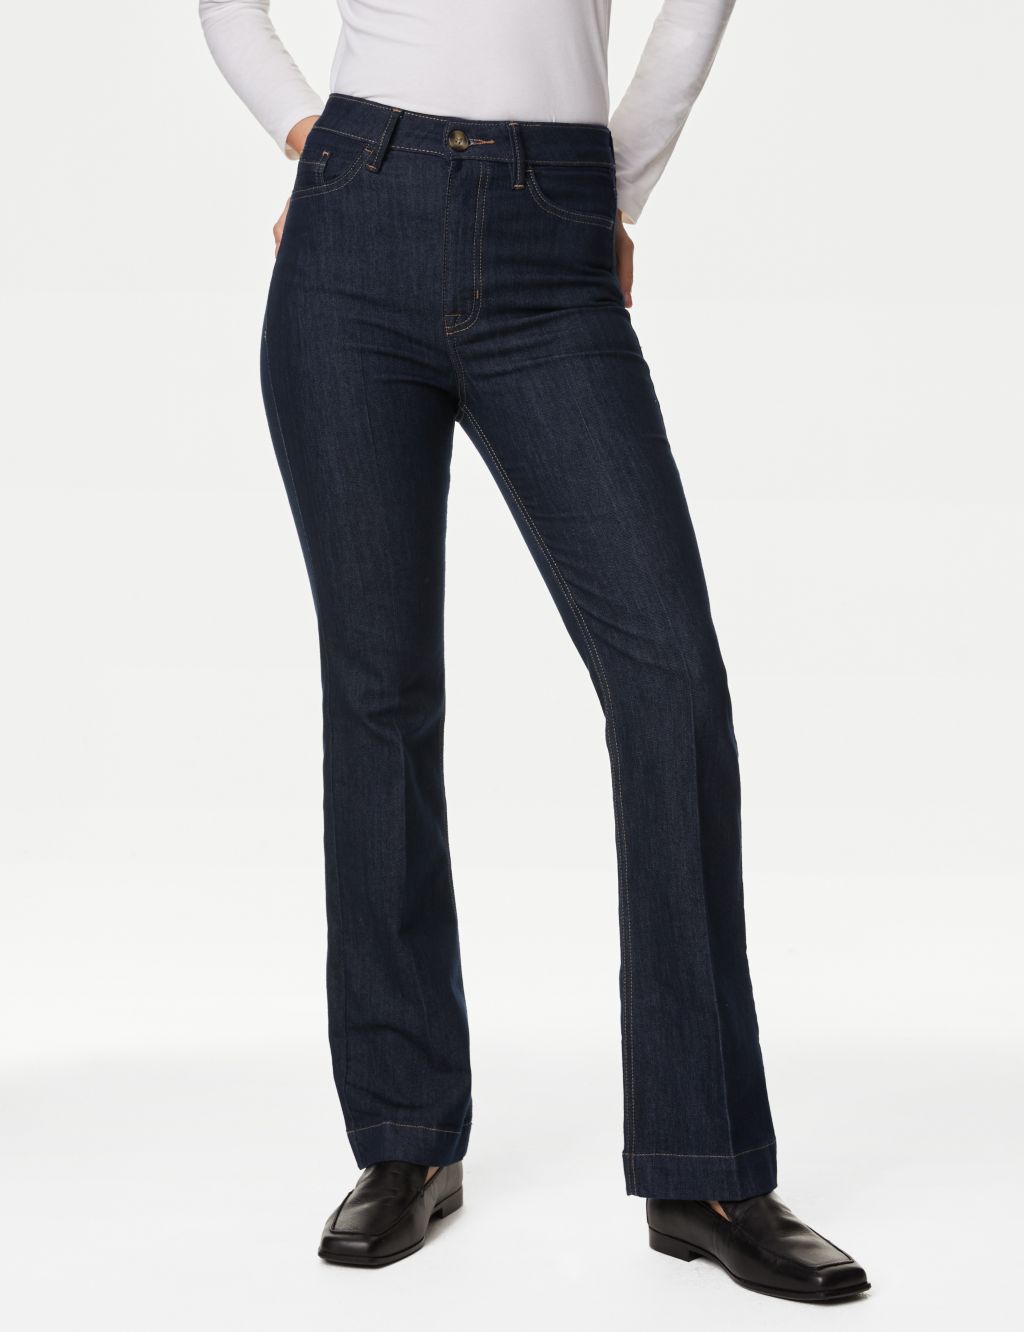 High Waisted Crease Front Flared Jeans image 4